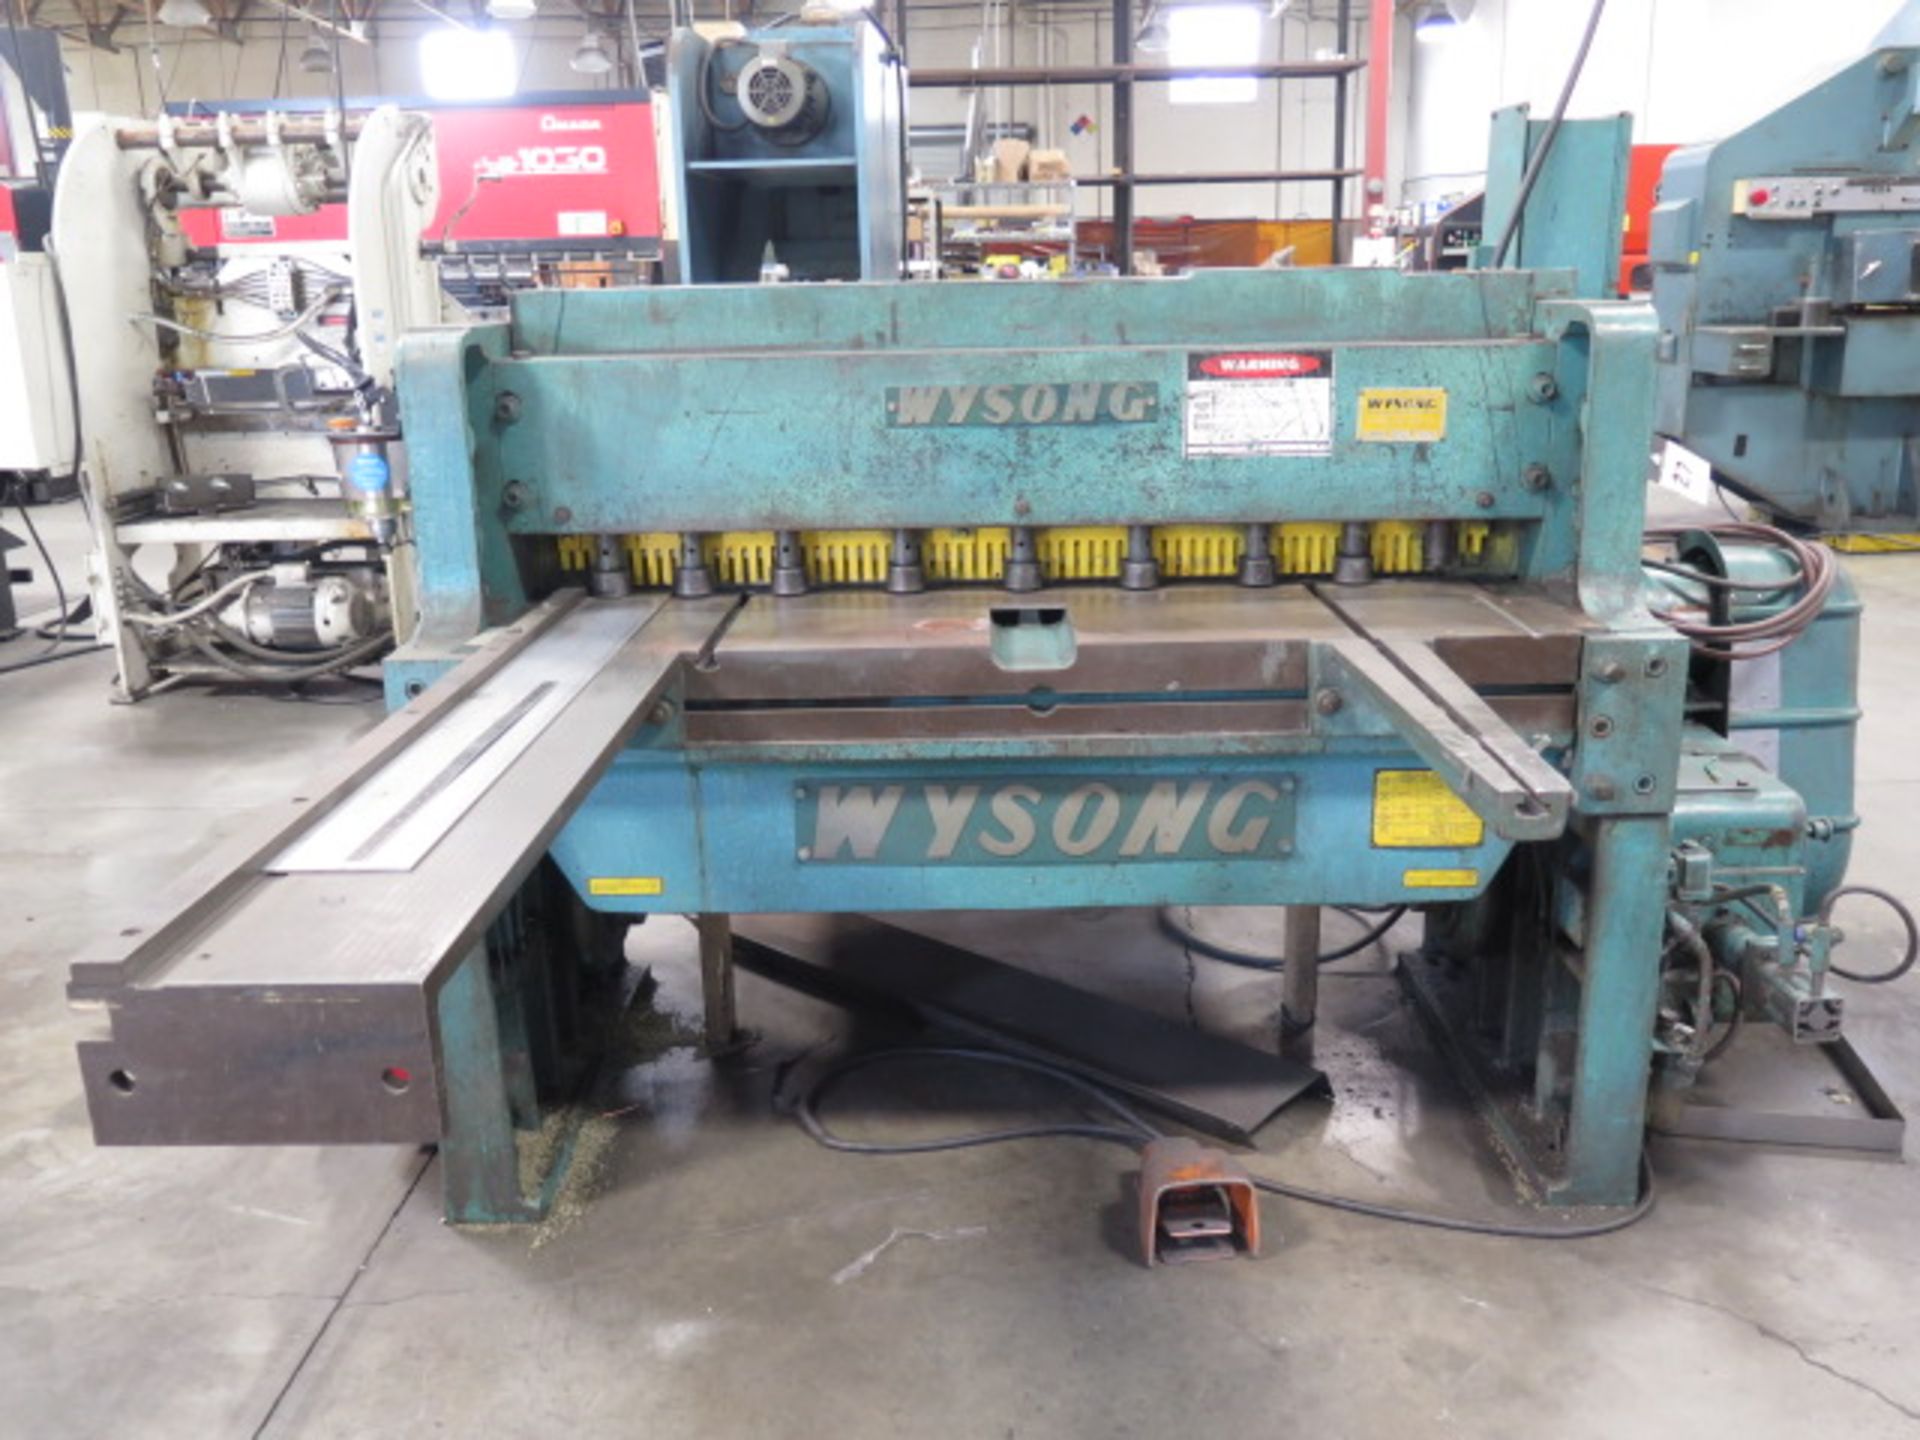 Wysong mdl. 1052 10GA x 52” Power Shear s/n P58-208 w/ 56” Squaring Arm, Front Supports SOLD AS IS